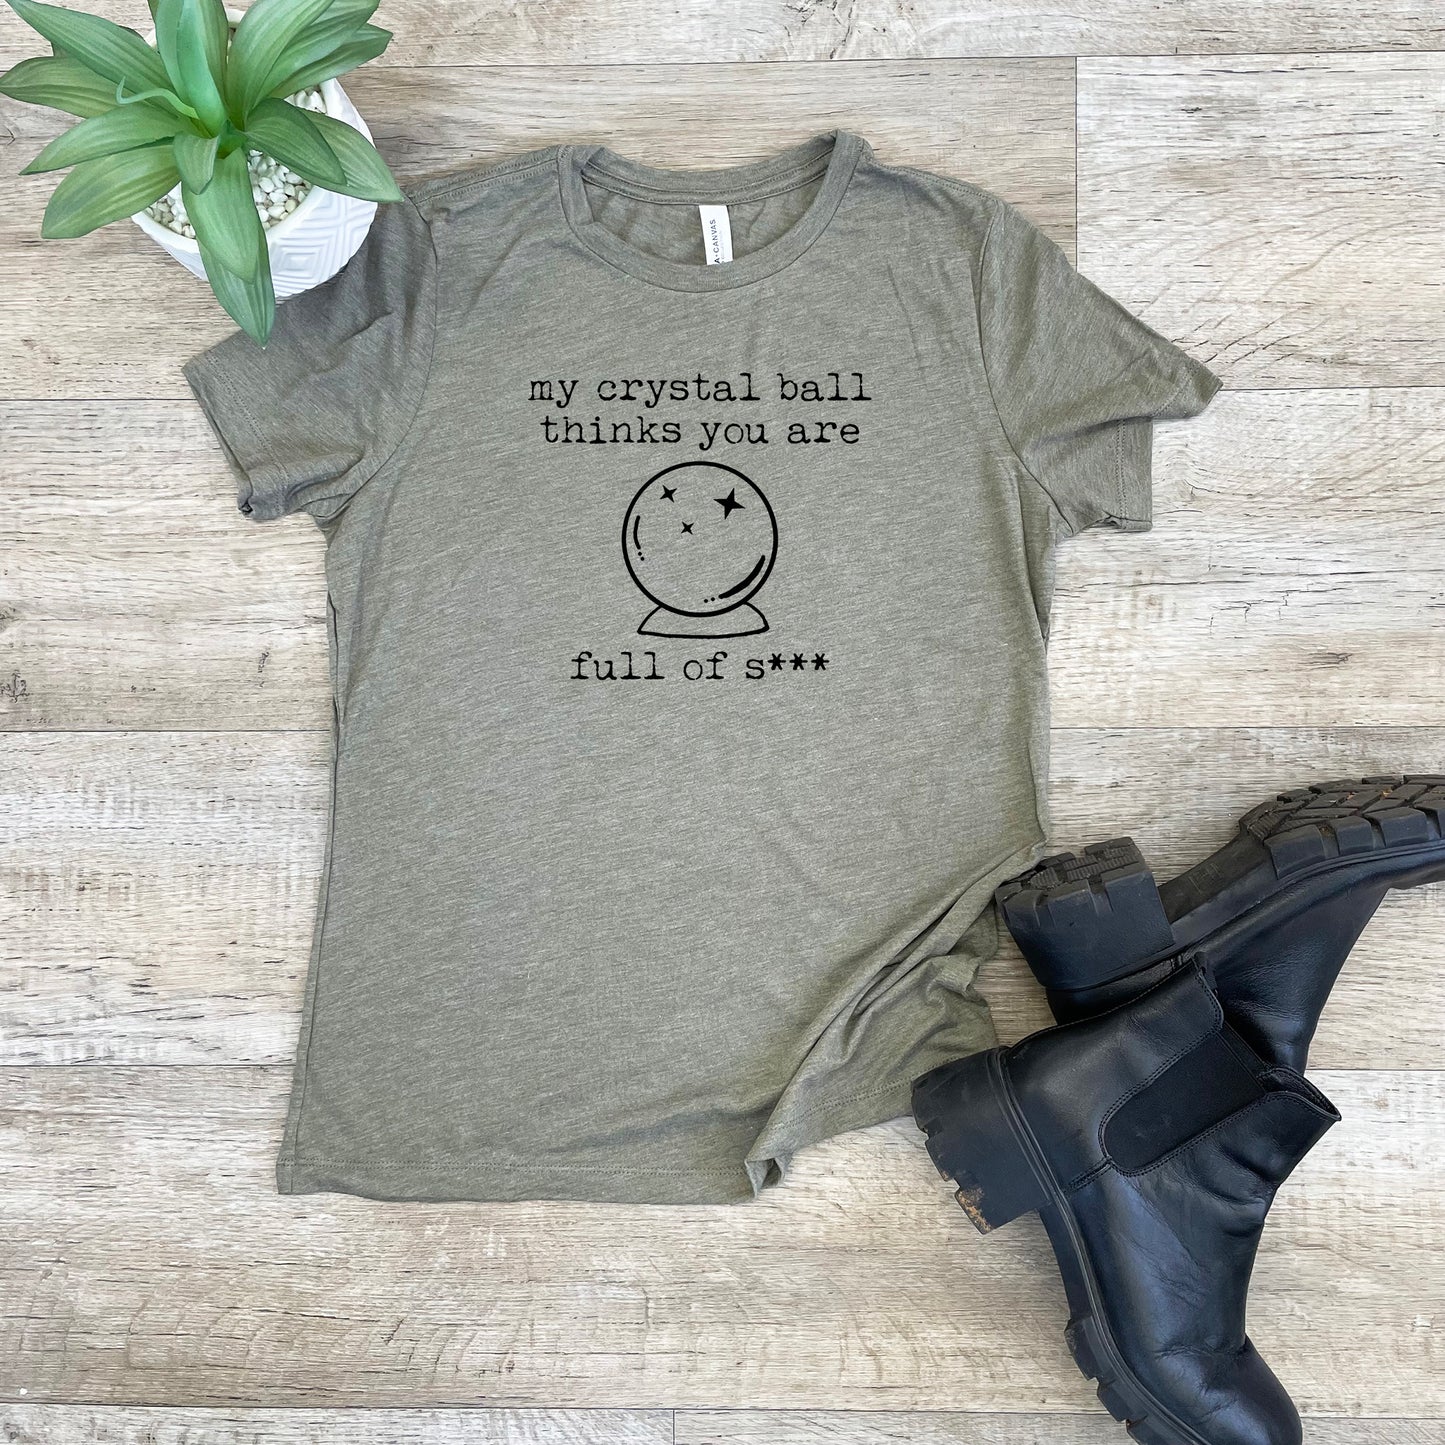 My Crystal Ball Thinks You Are... Full Of S*** - Women's Crew Tee - Olive or Dusty Blue